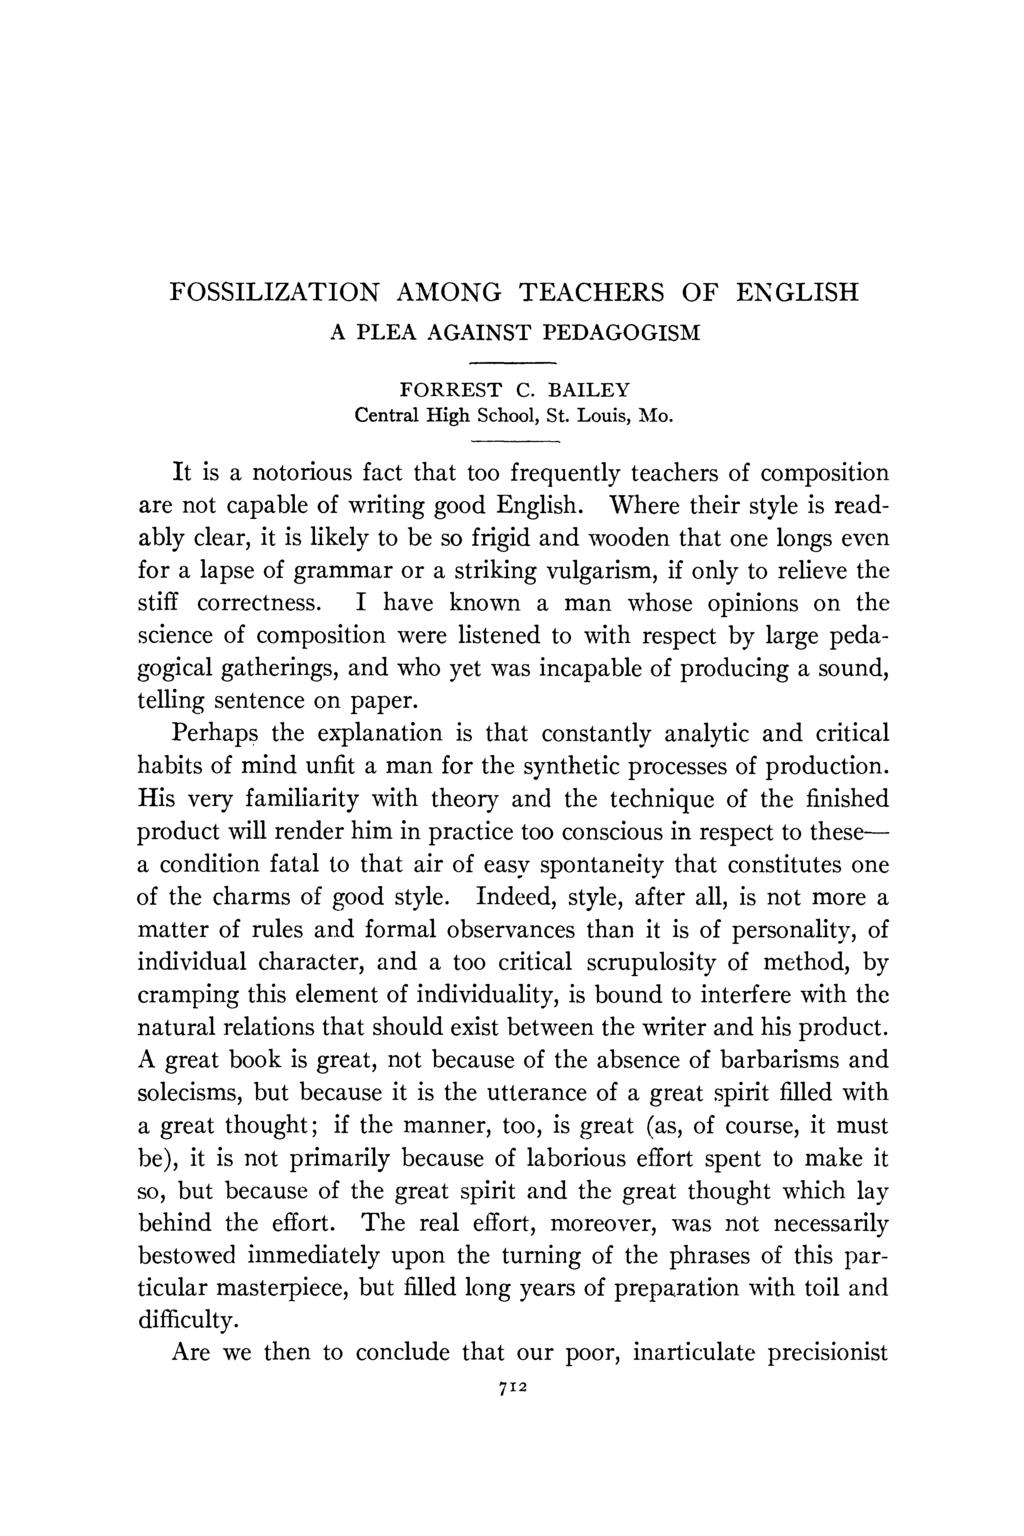 FOSSILIZATION AMONG TEACHERS OF ENGLISH A PLEA AGAINST PEDAGOGISM FORREST C. BAILEY Central High School, St. Louis, Mo.